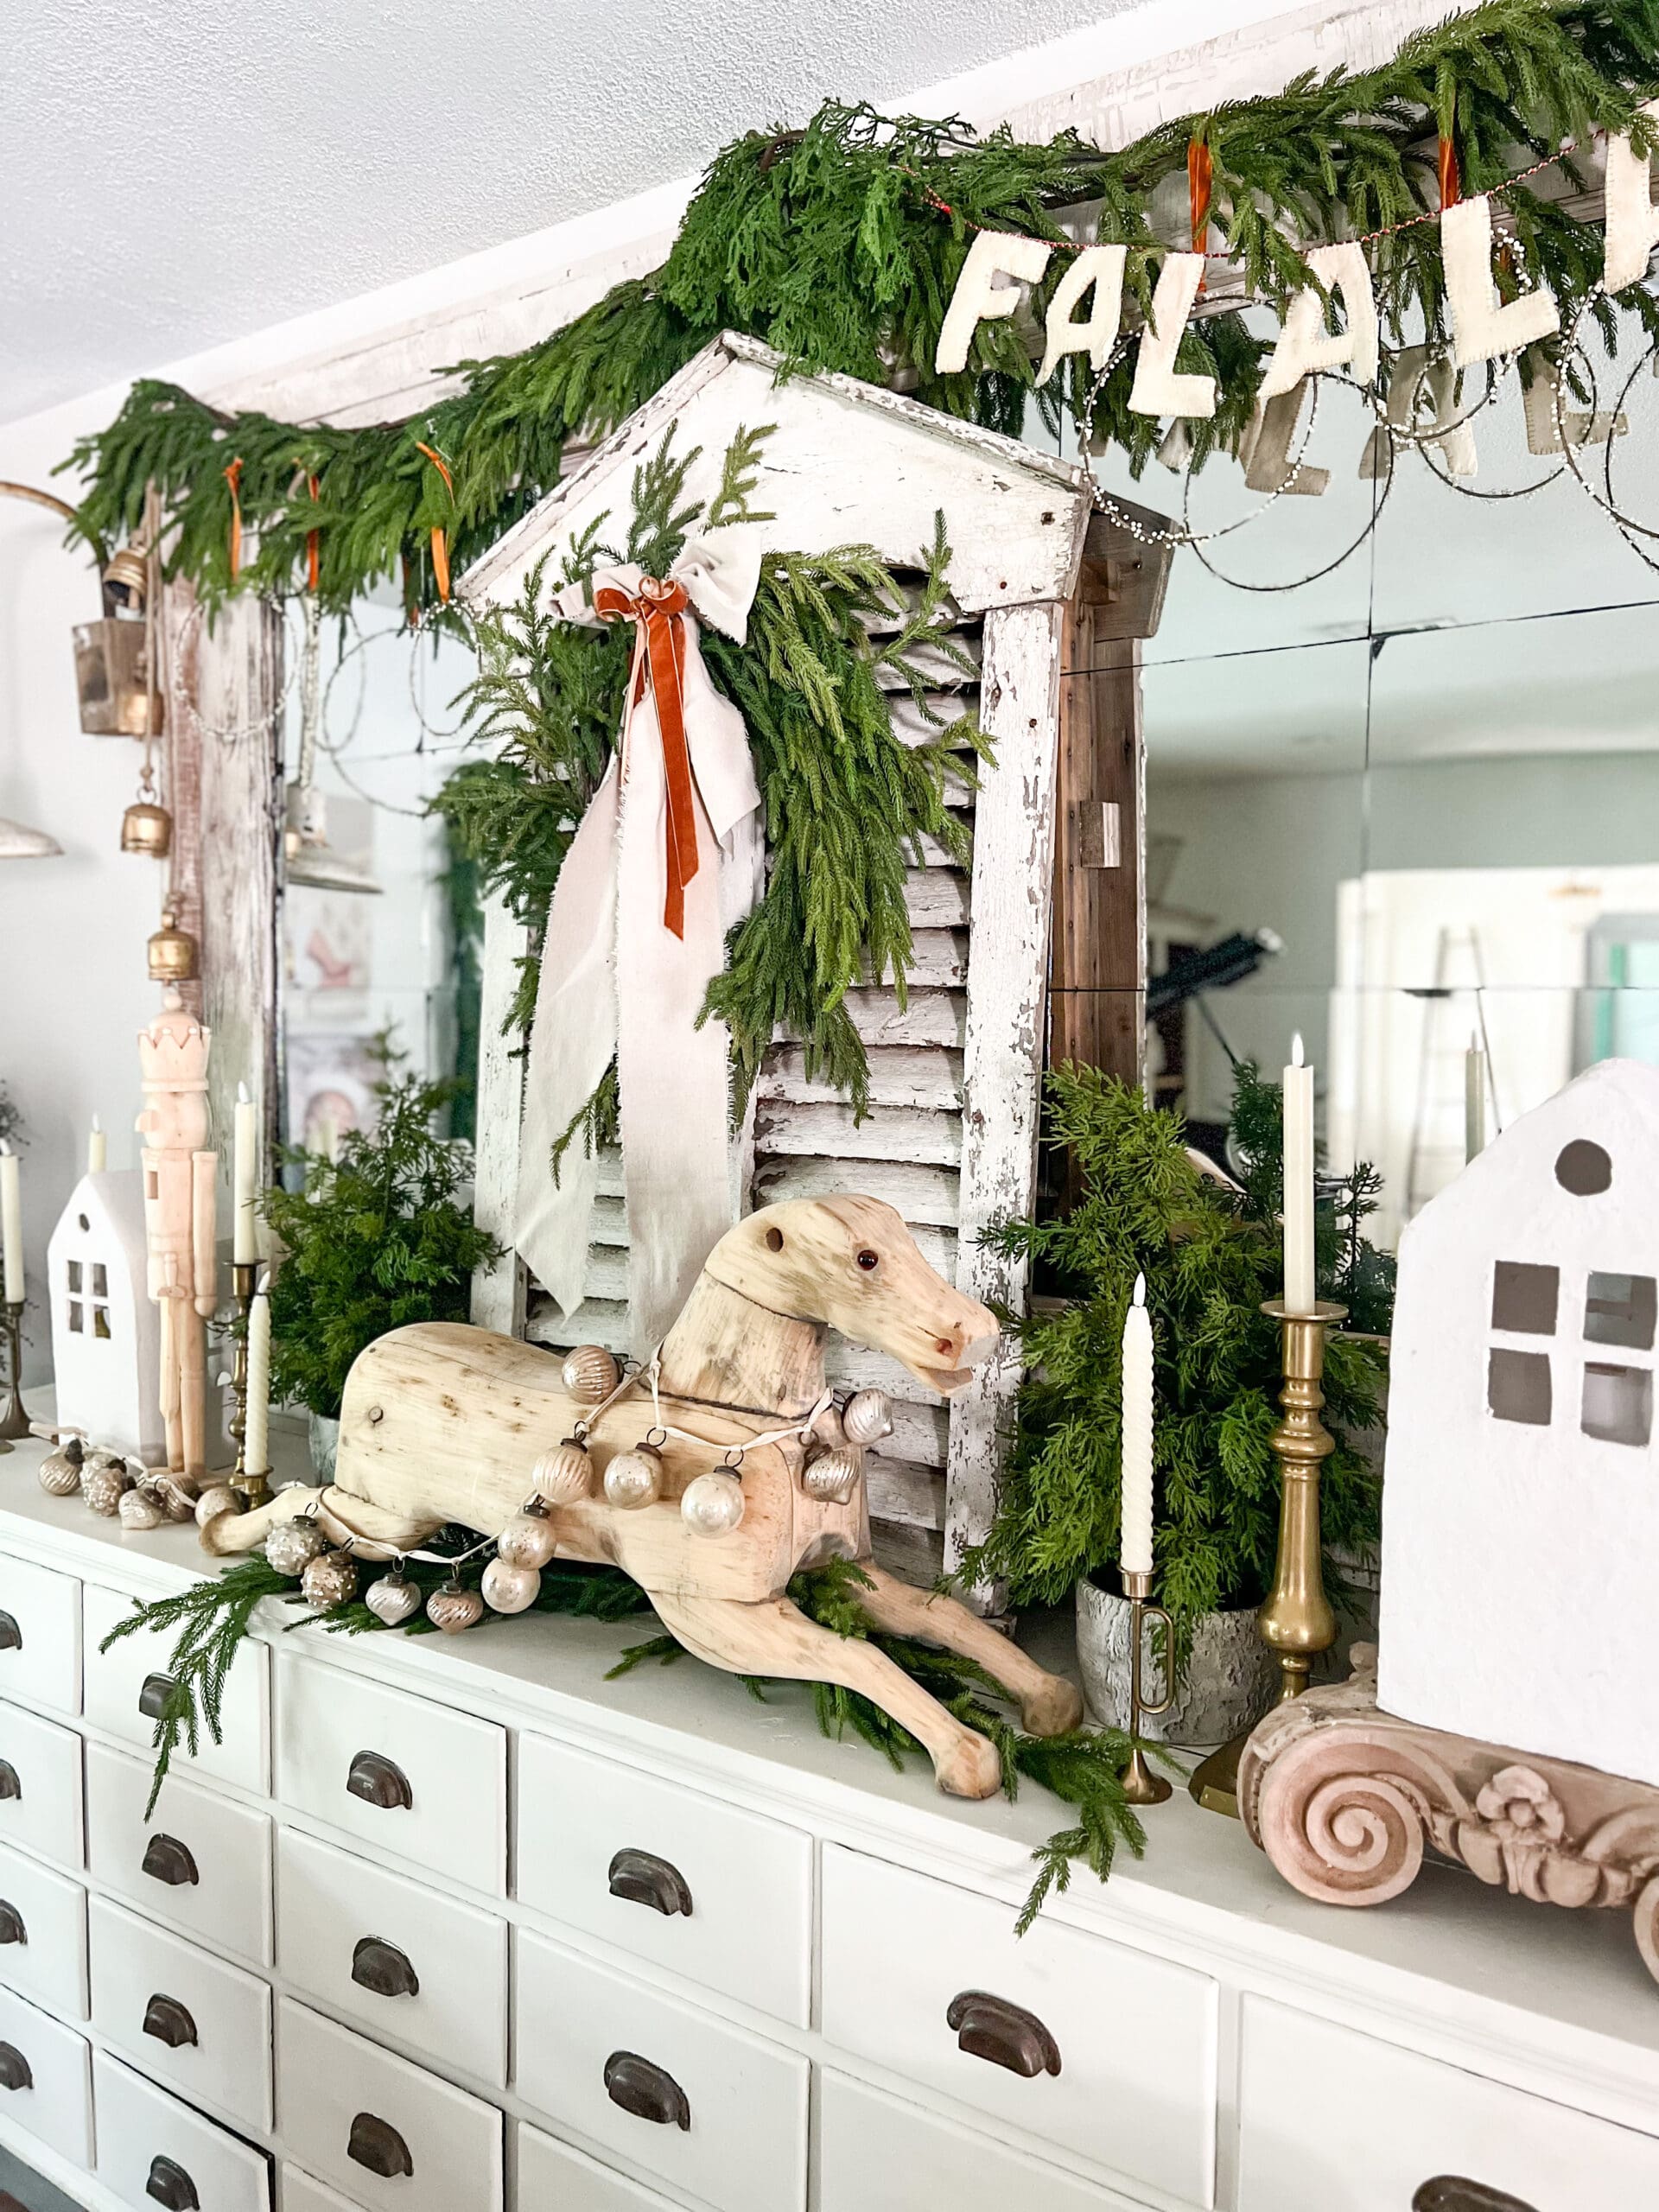 white apothecary styled with a wooden rocking horse, a large mirror with a "fa la la" sign, and Christmas greenery hung from it